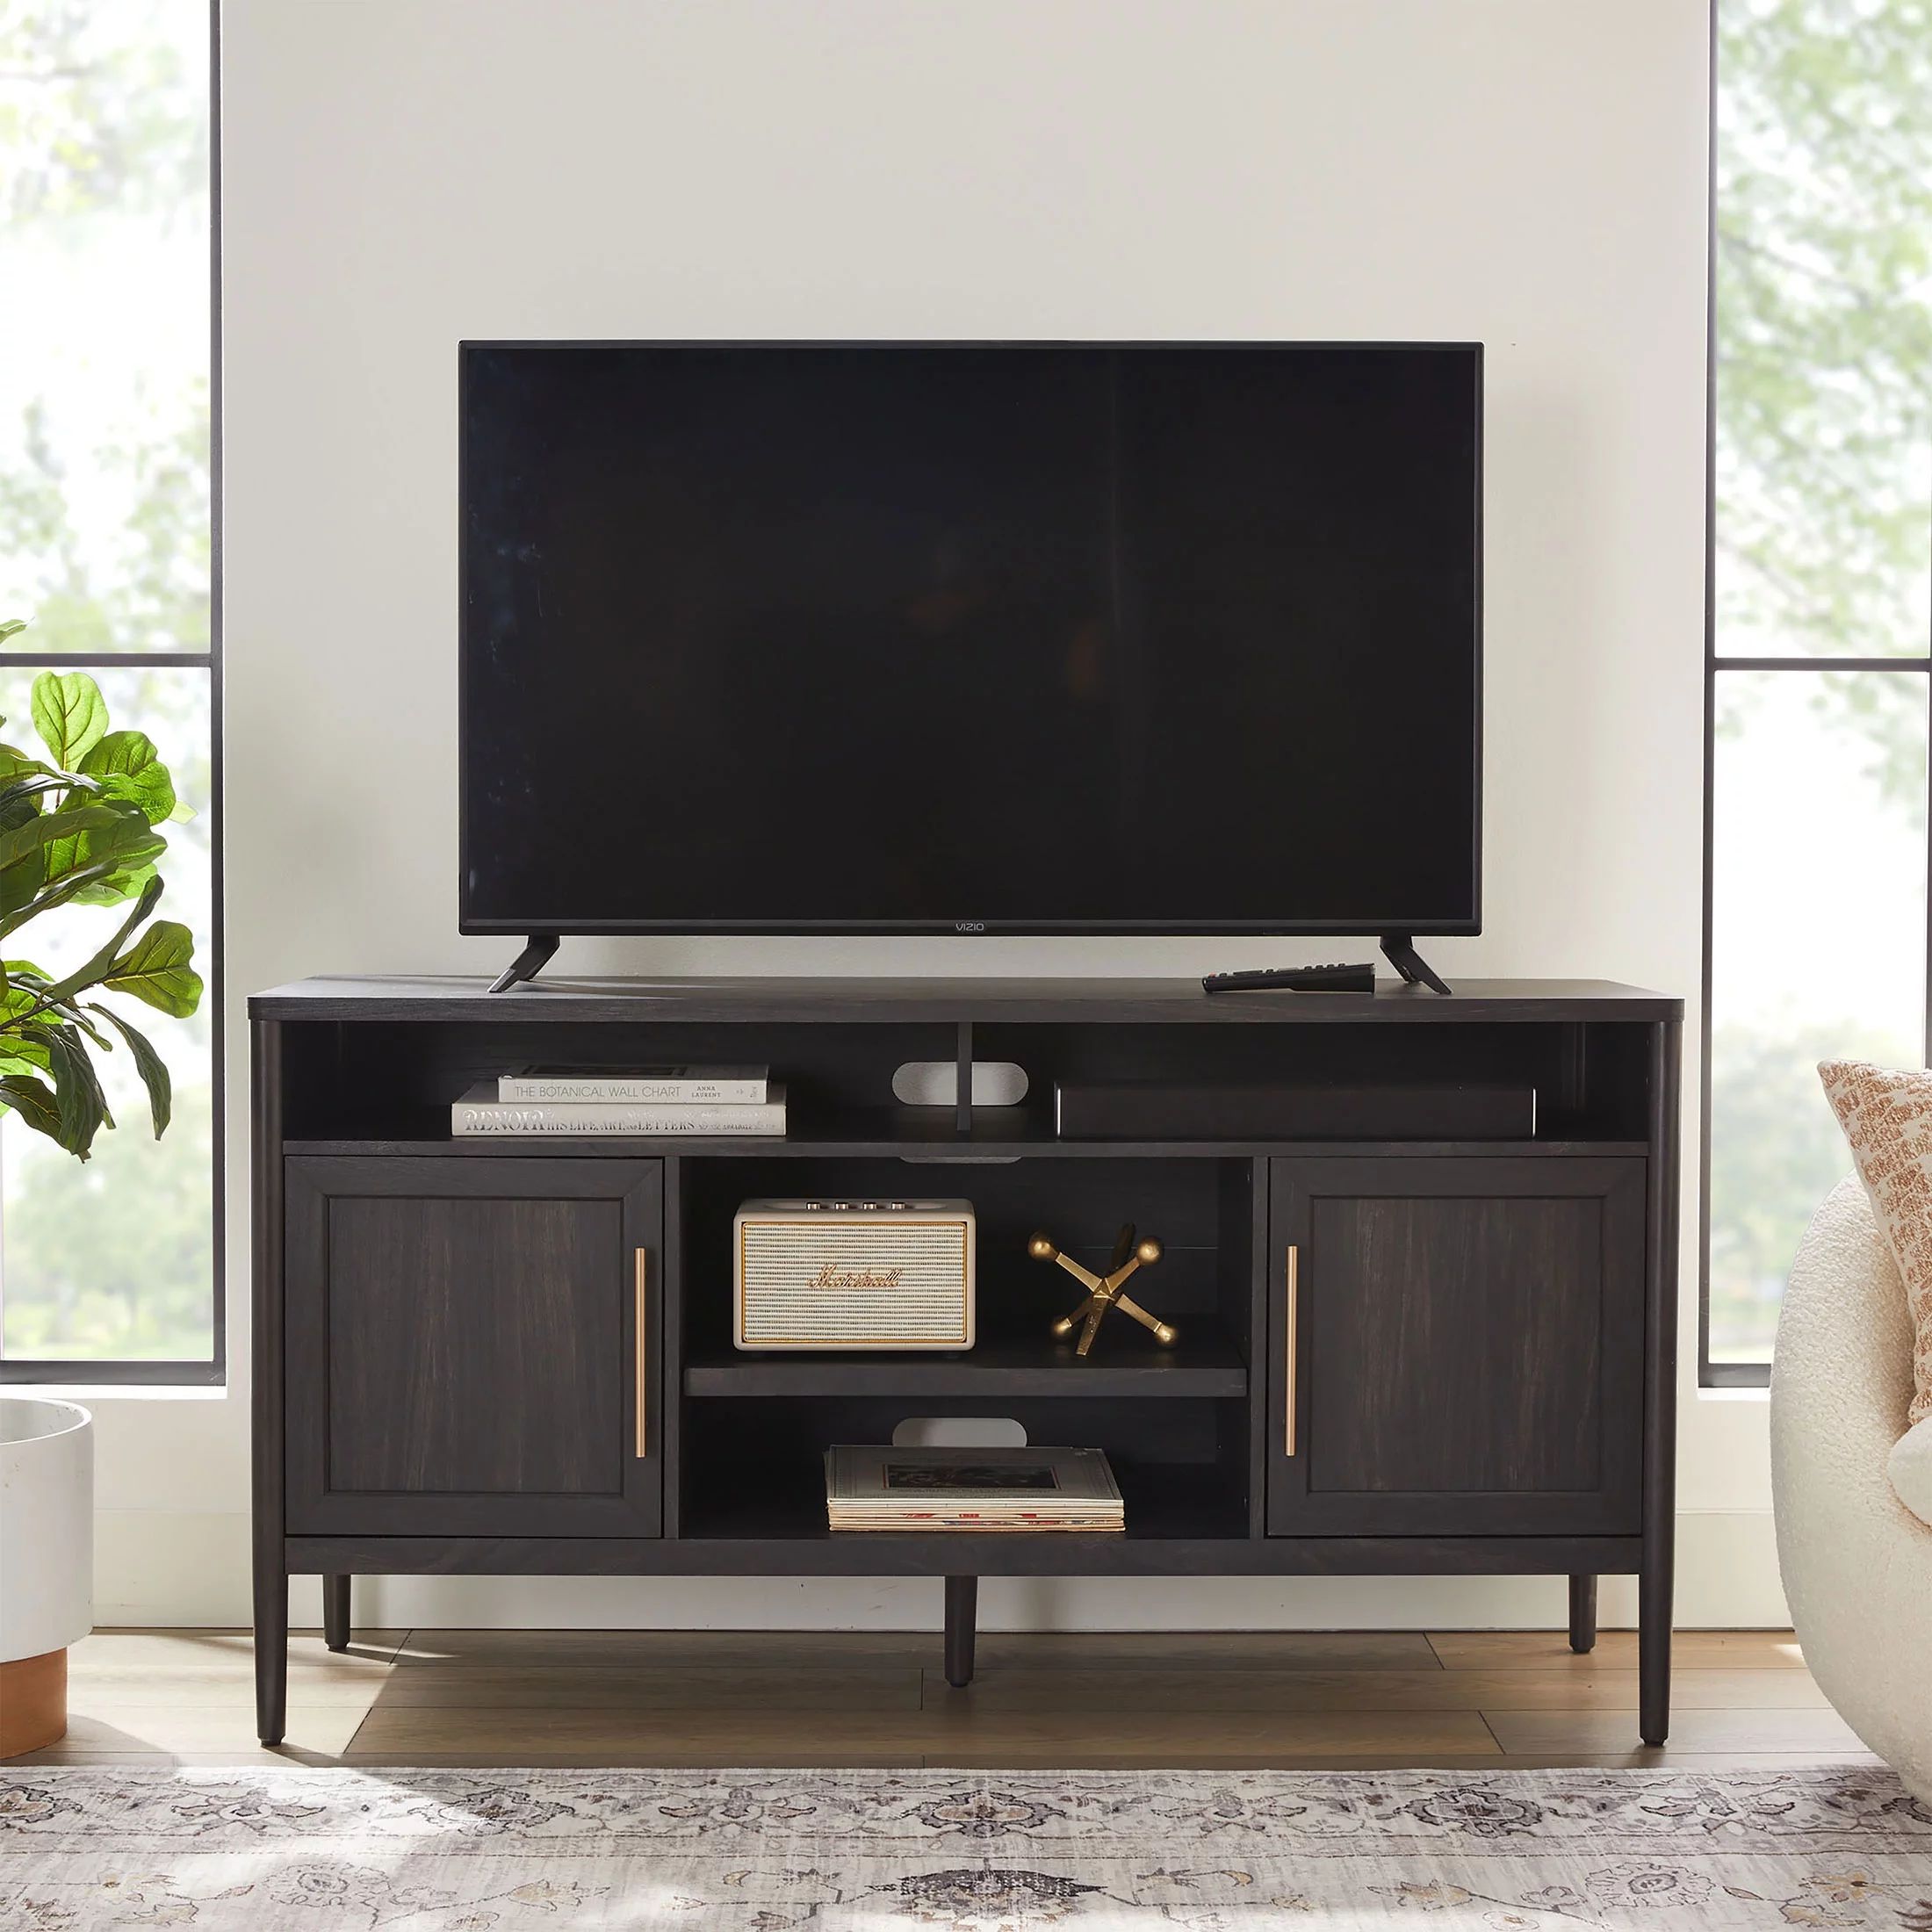 Better Homes & Gardens Oaklee TV Stand for TVs up to 70”, Charcoal finish | Walmart (US)